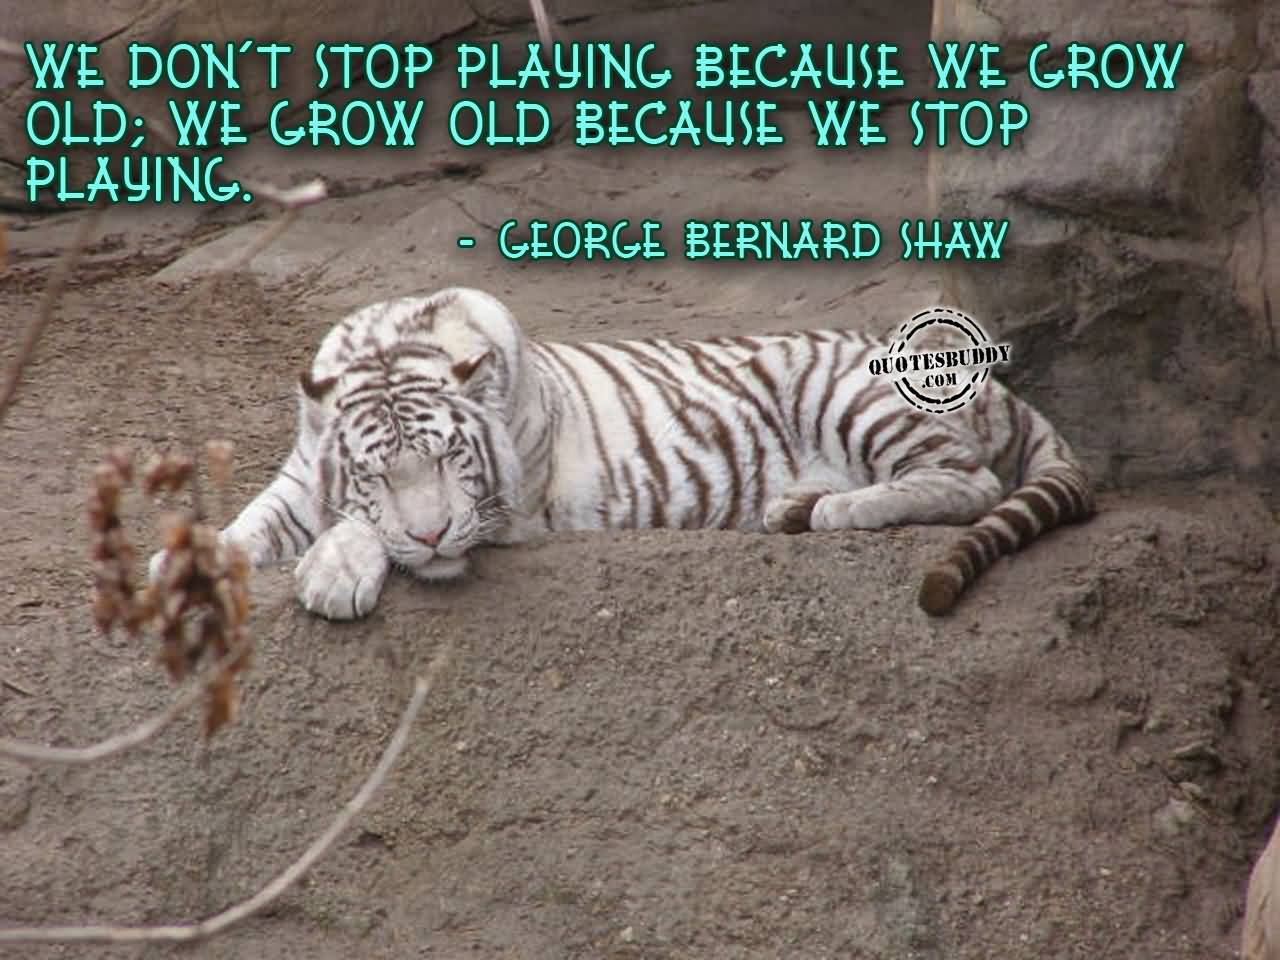 We don’t stop playing because we grow old; we grow old because we stop playing. George Bernard Shaw